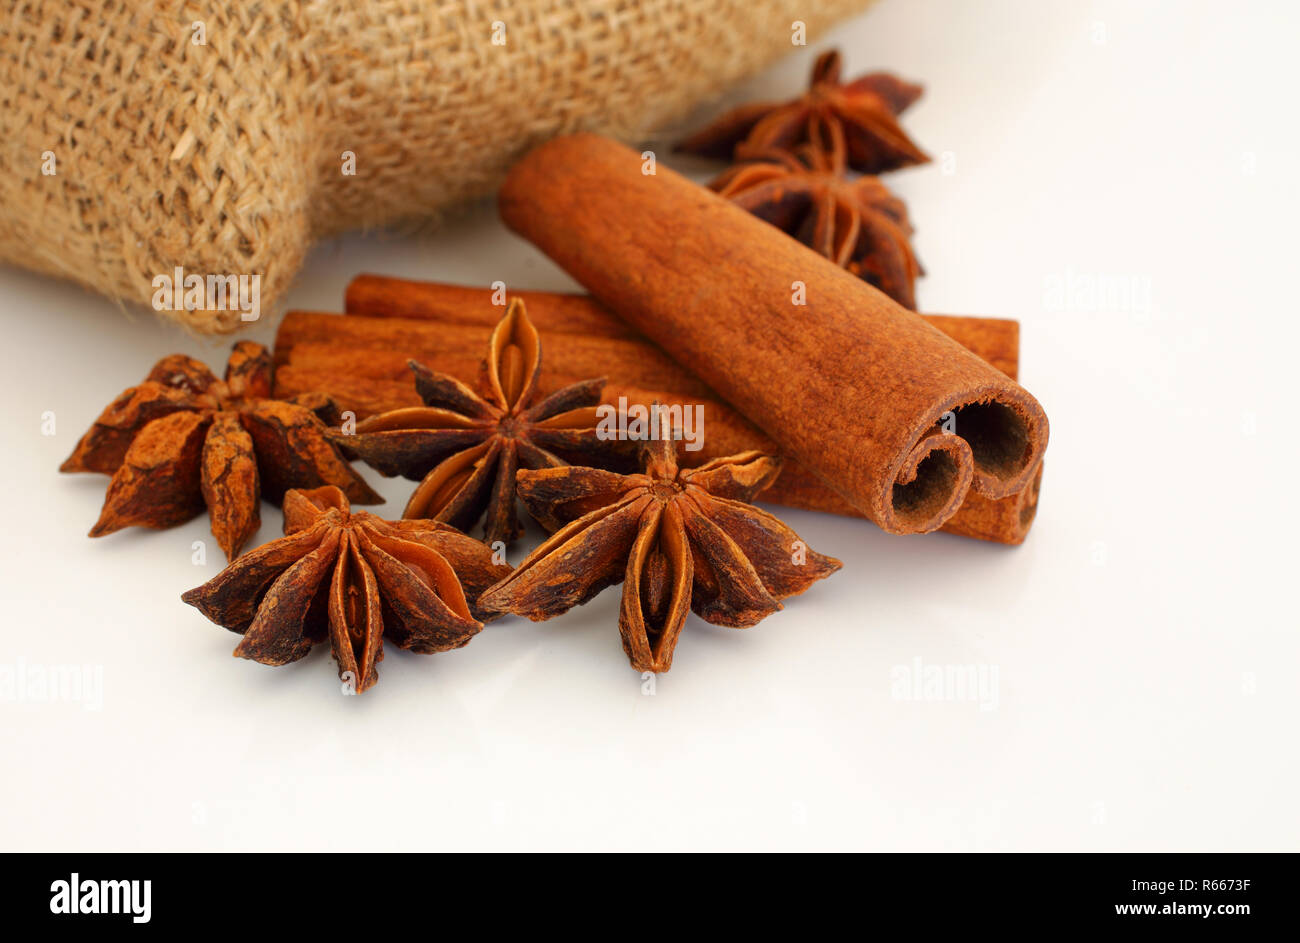 Cinnamon sticks and star aniseed on white reflective background with hessian bag. Selective focus. Macro. Stock Photo